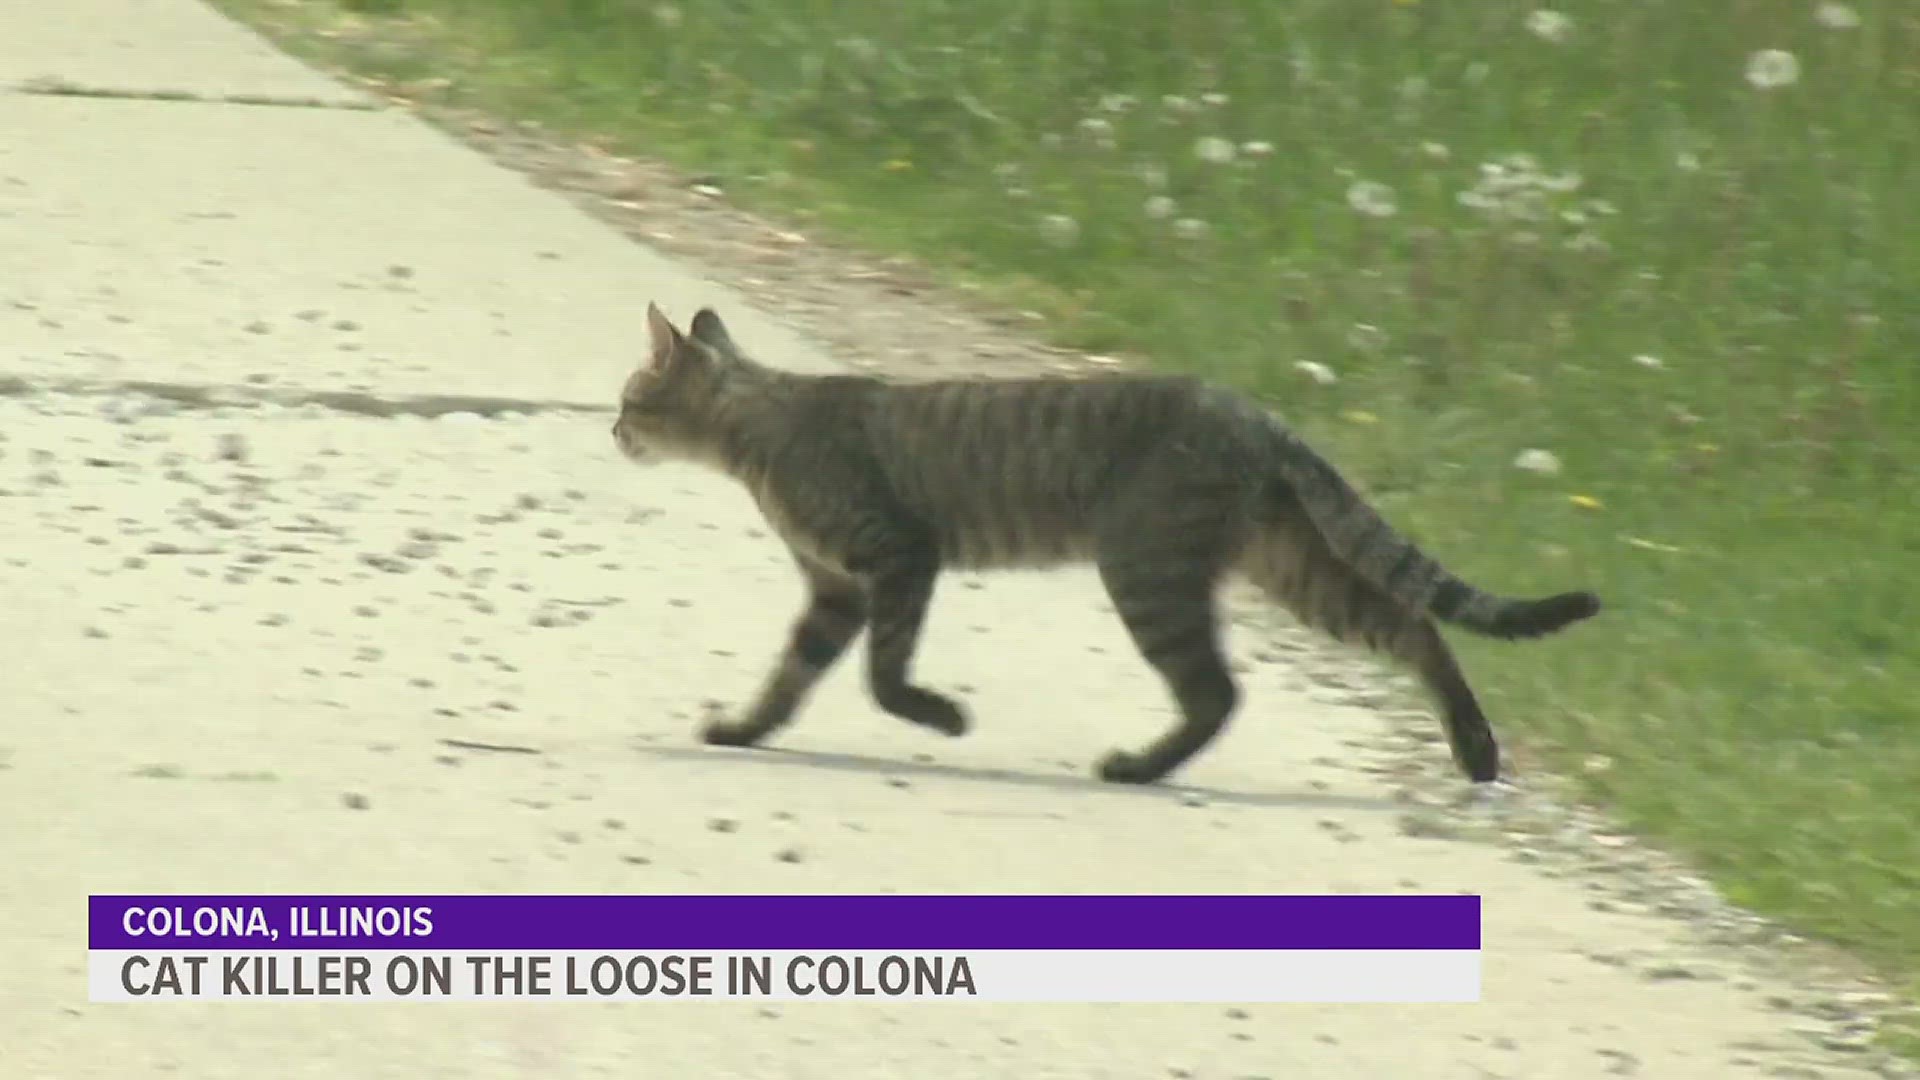 4 cats were found with bullets wounds since May 12 at Colona Park. Police don't know who is responsible.